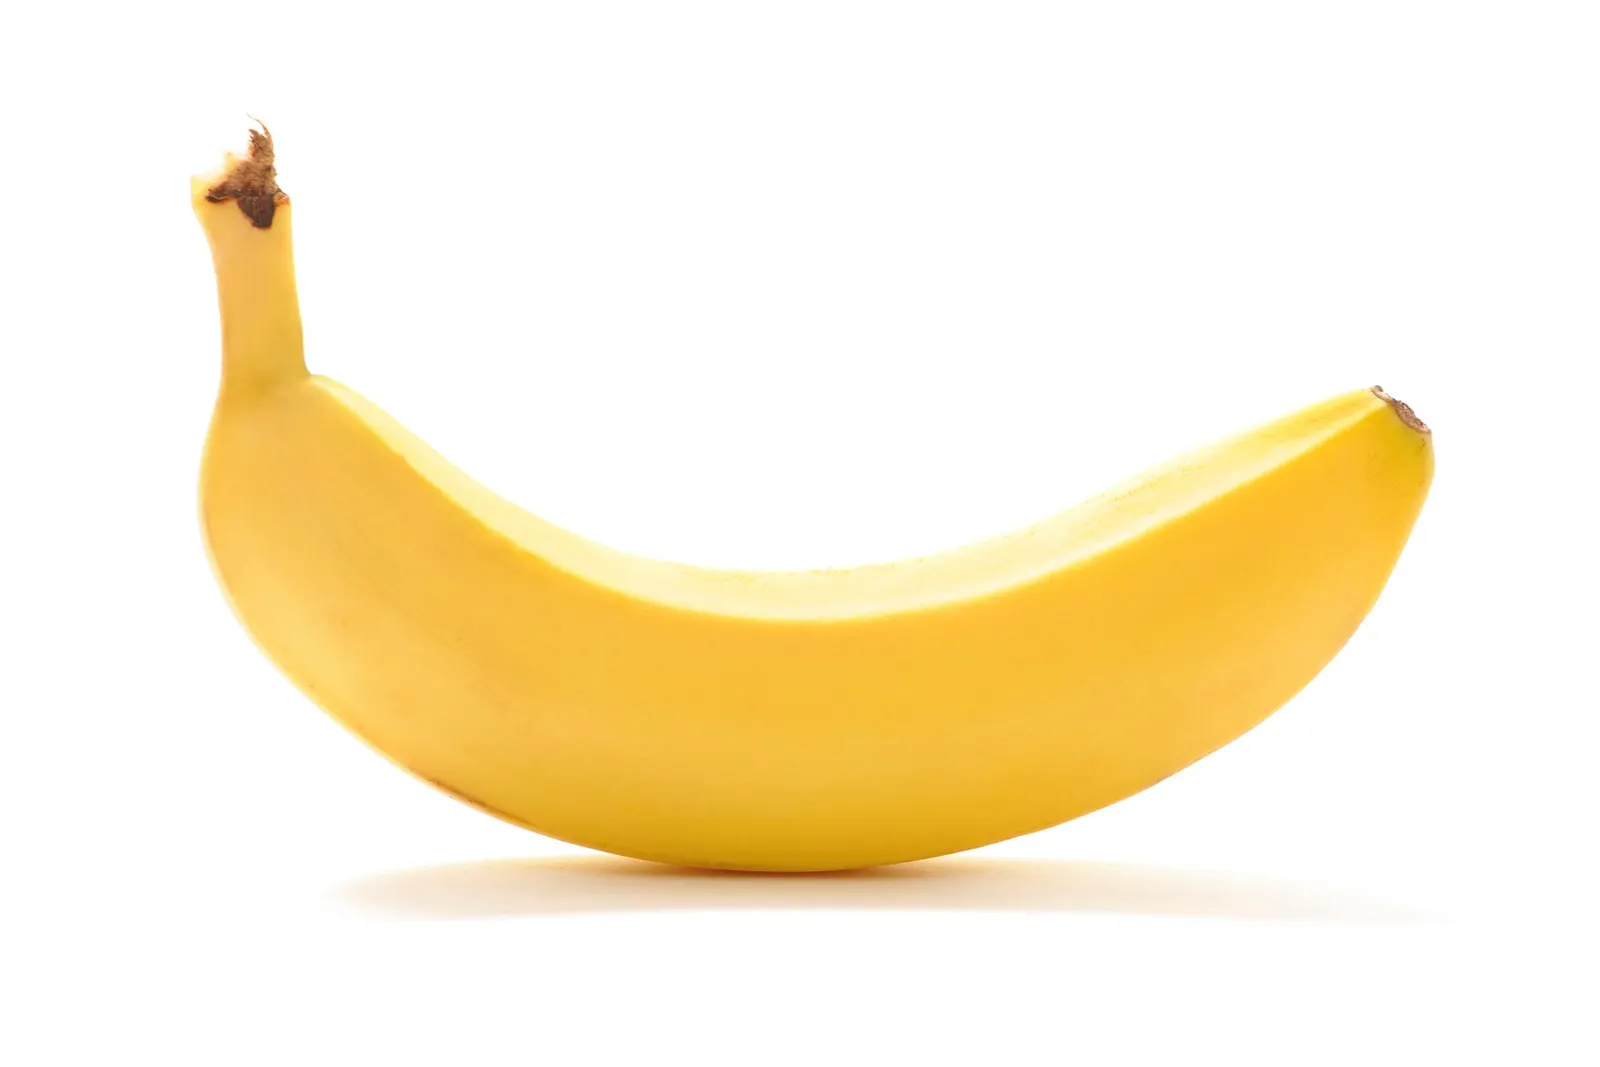 Building A Better Banana | Science| Smithsonian Magazine